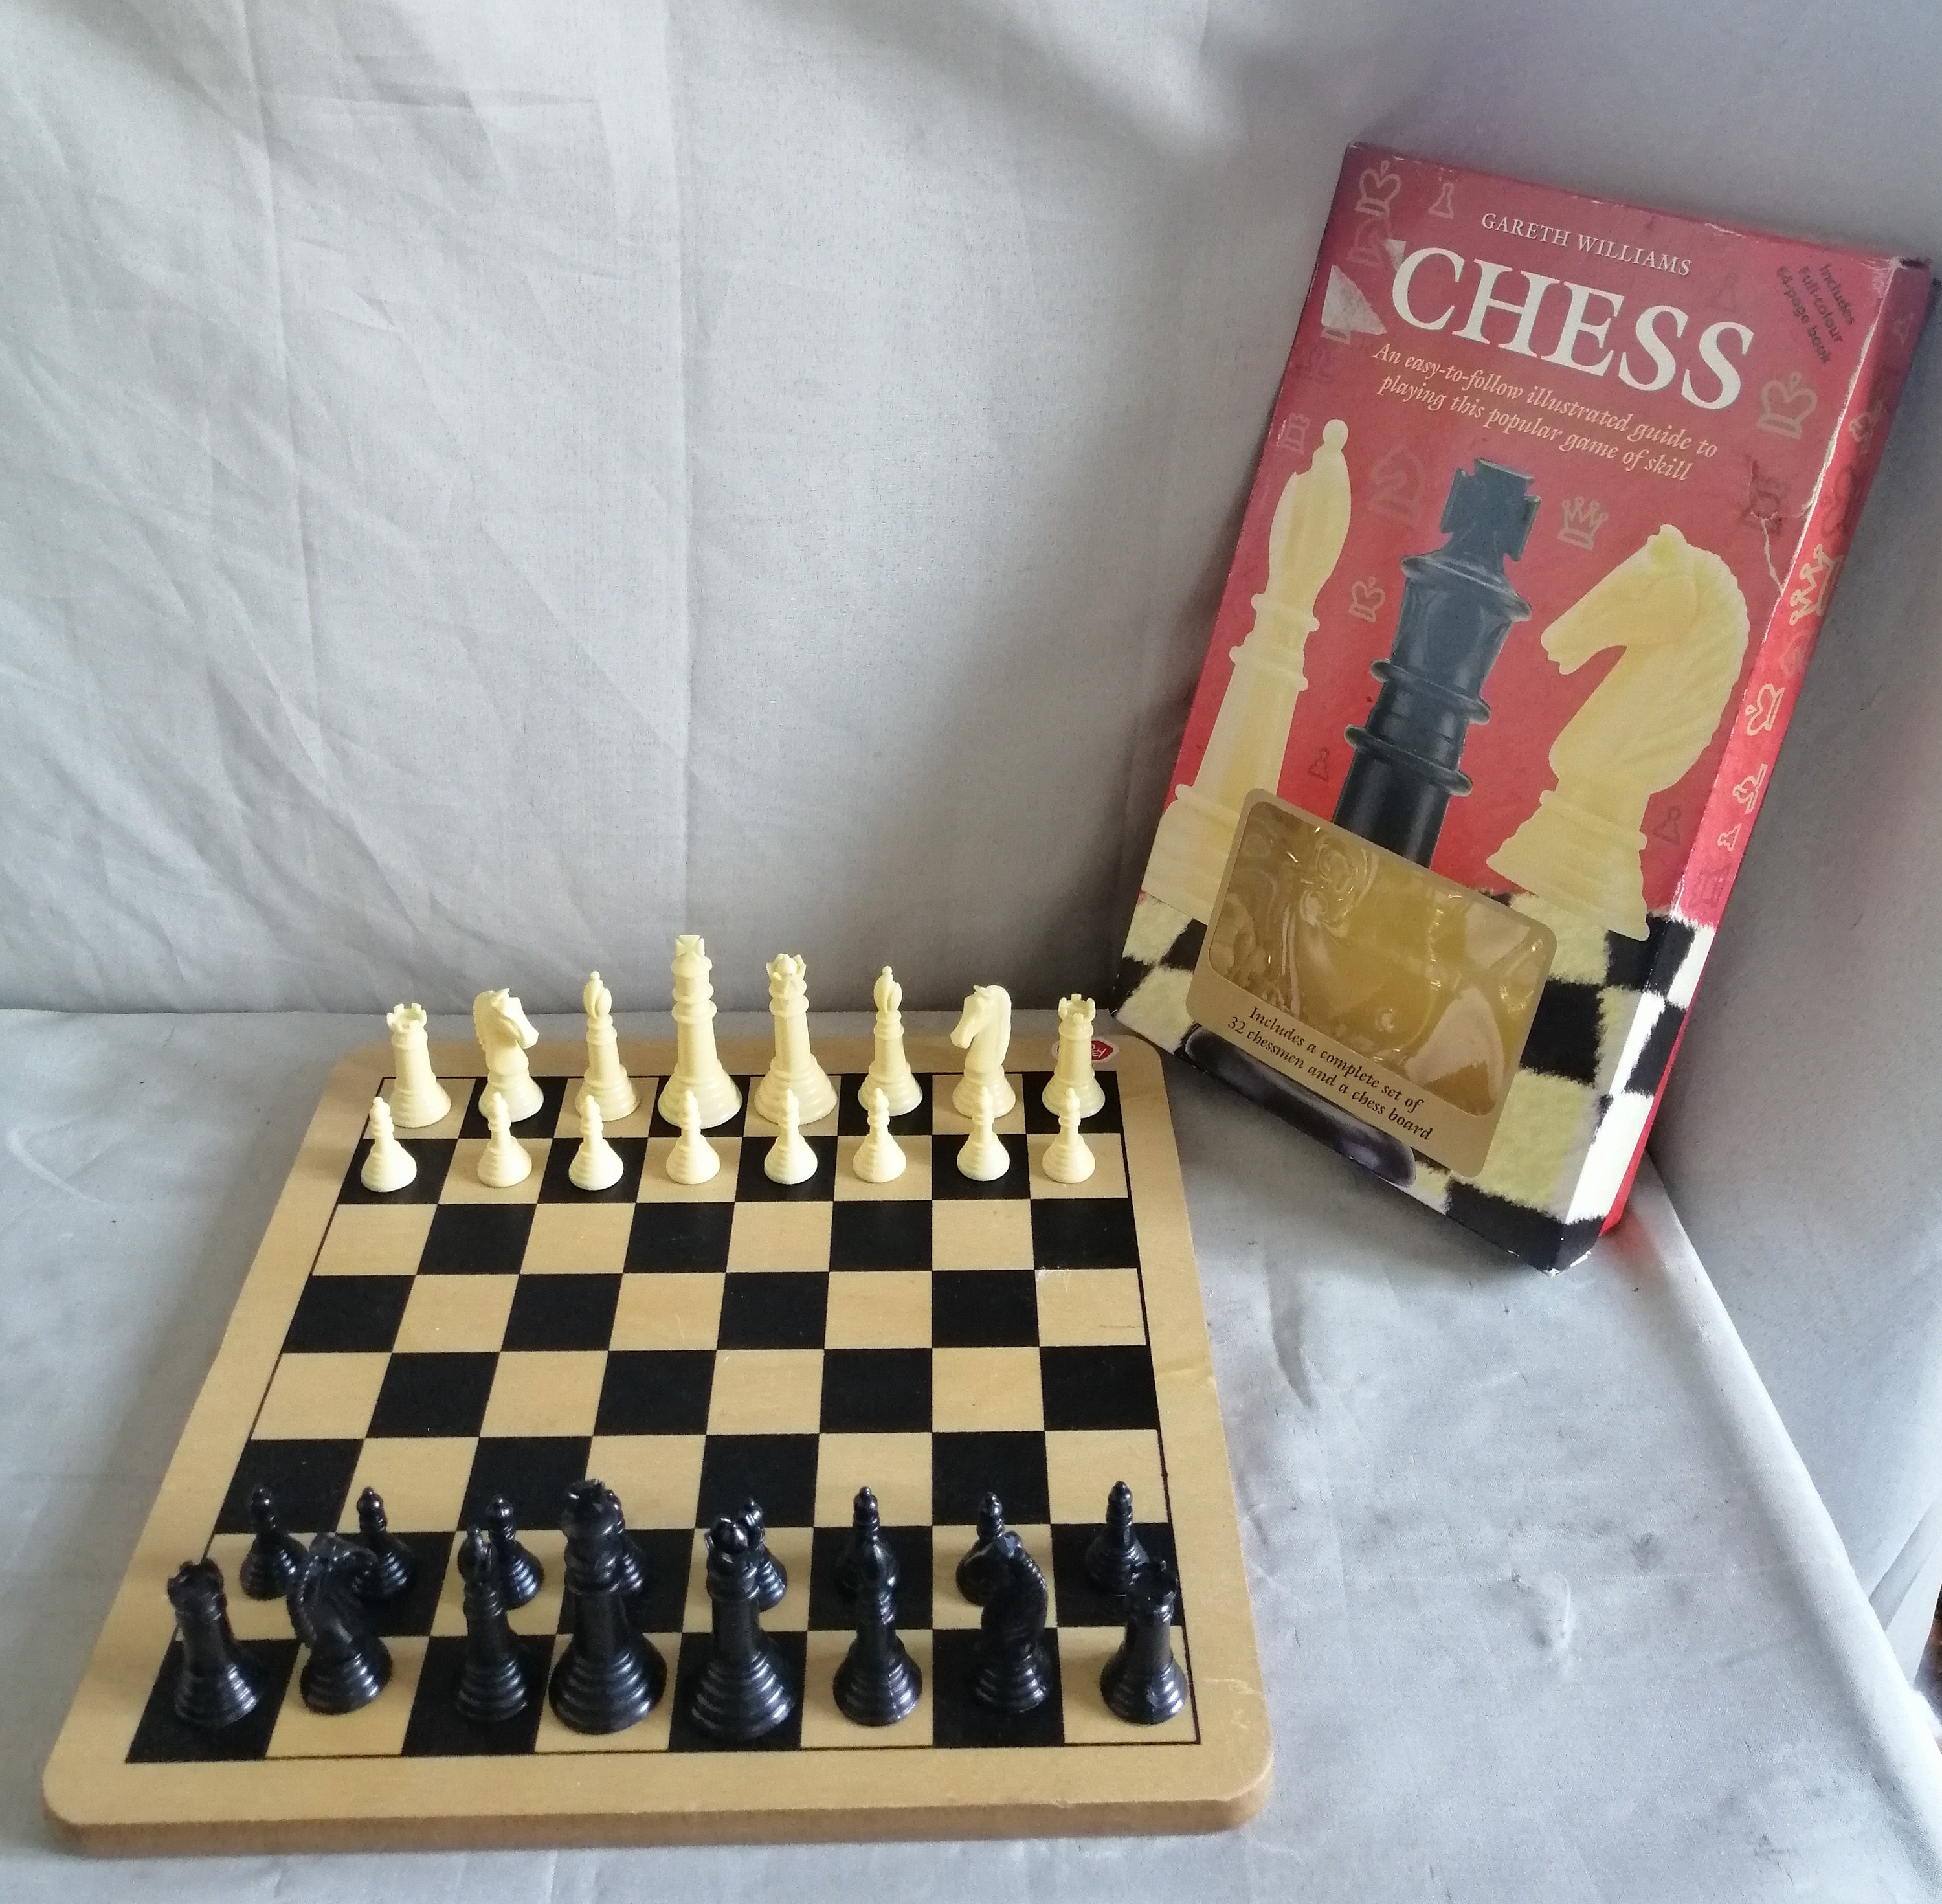 Chess: An Easy-to-follow Illustrated Guide to Playing This Popular